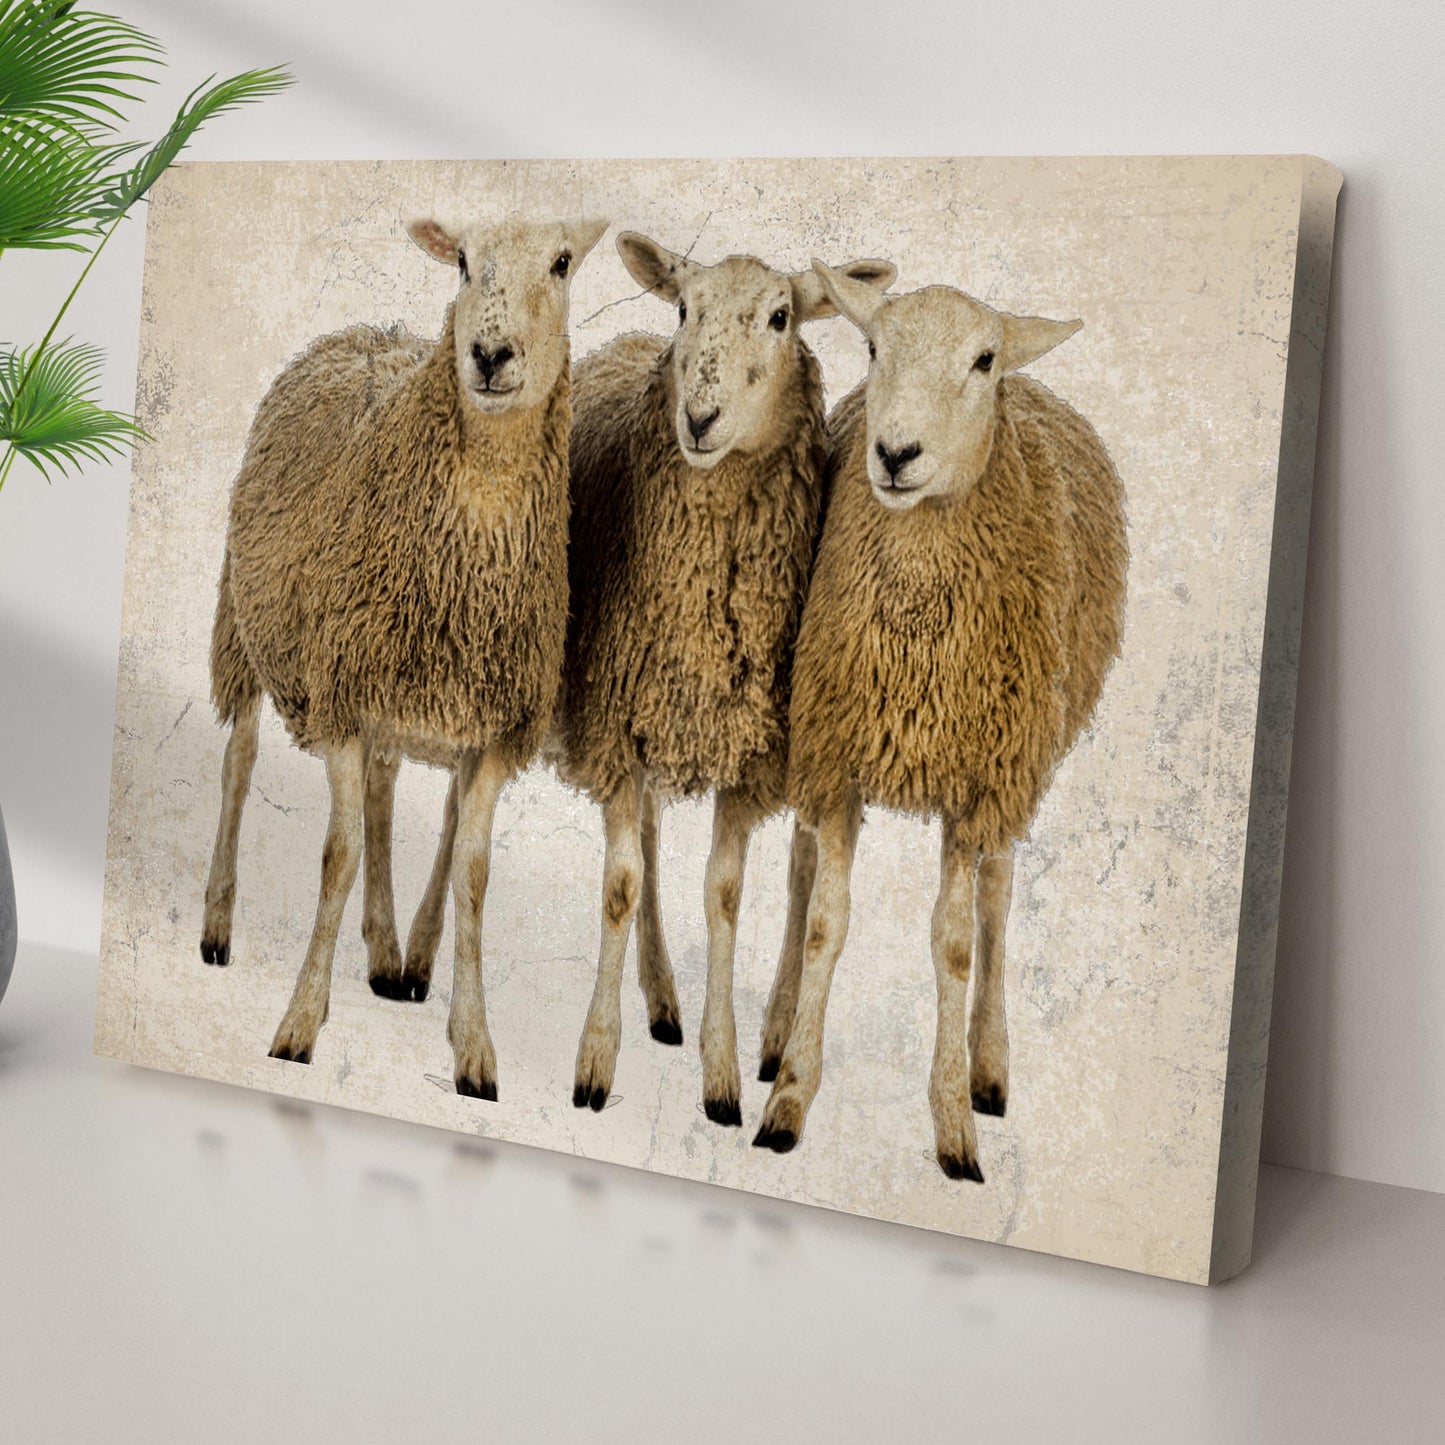 Rustic Sheep Herd Canvas Wall Art Style 1 - Image by Tailored Canvases